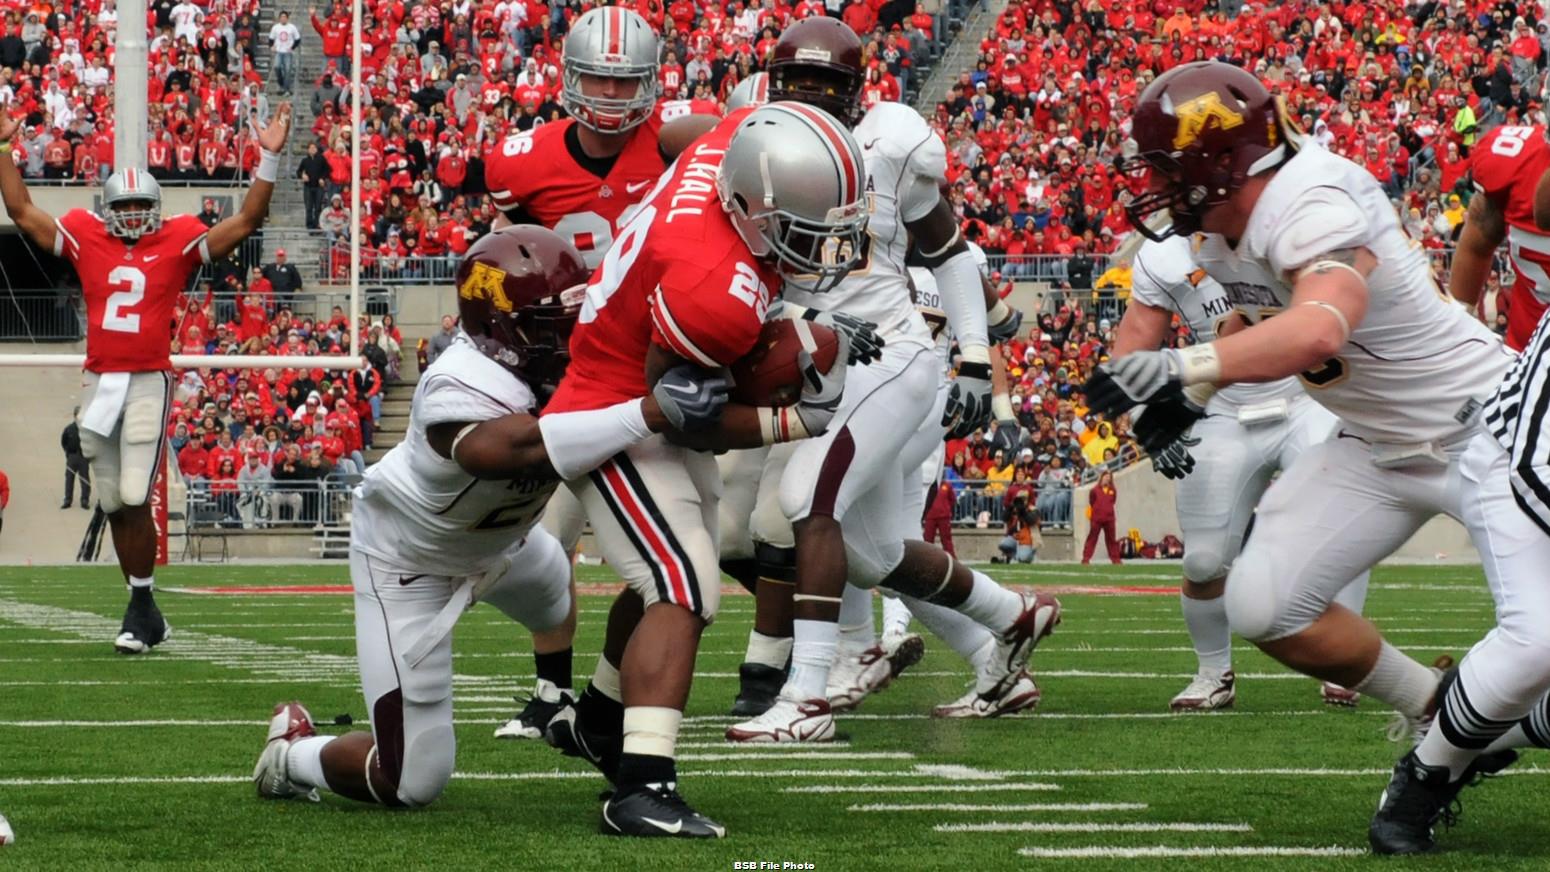 Ohio State football history: Where is former safety Zach Domicone now?